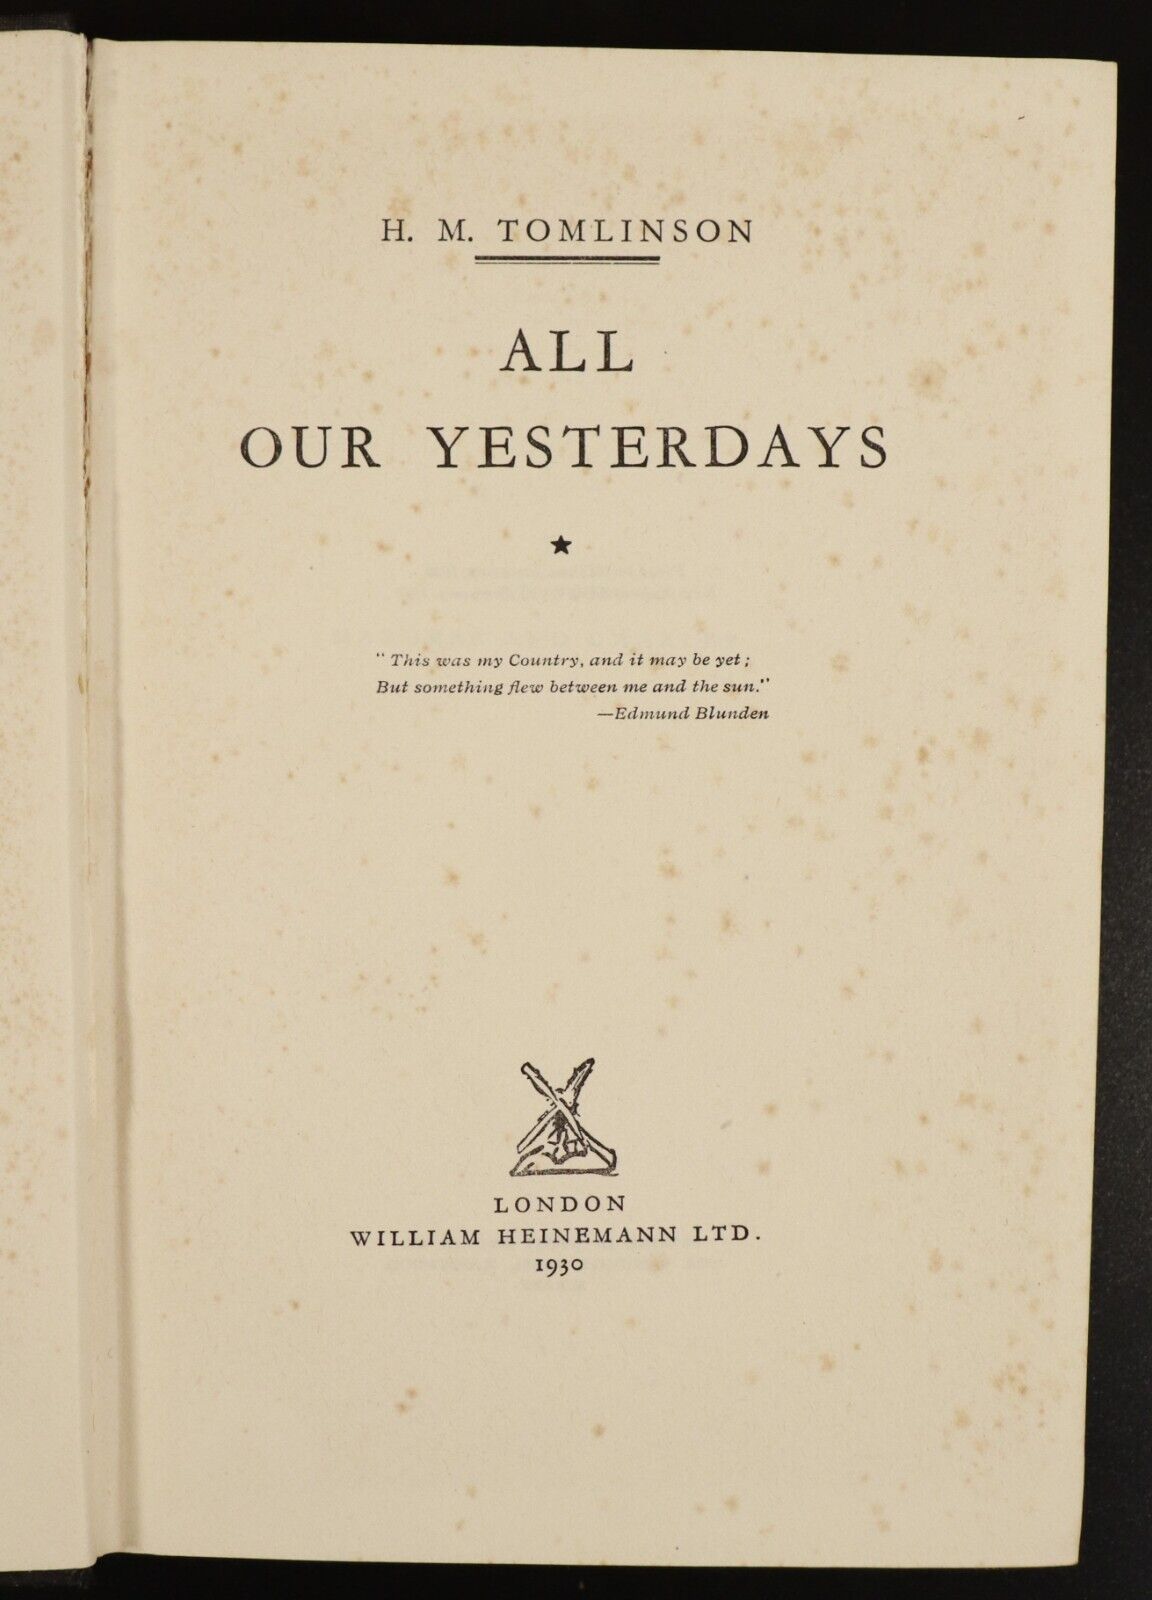 1930 All Our Yesterdays by H. M. Tomlinson Antique British Fiction Book - 0